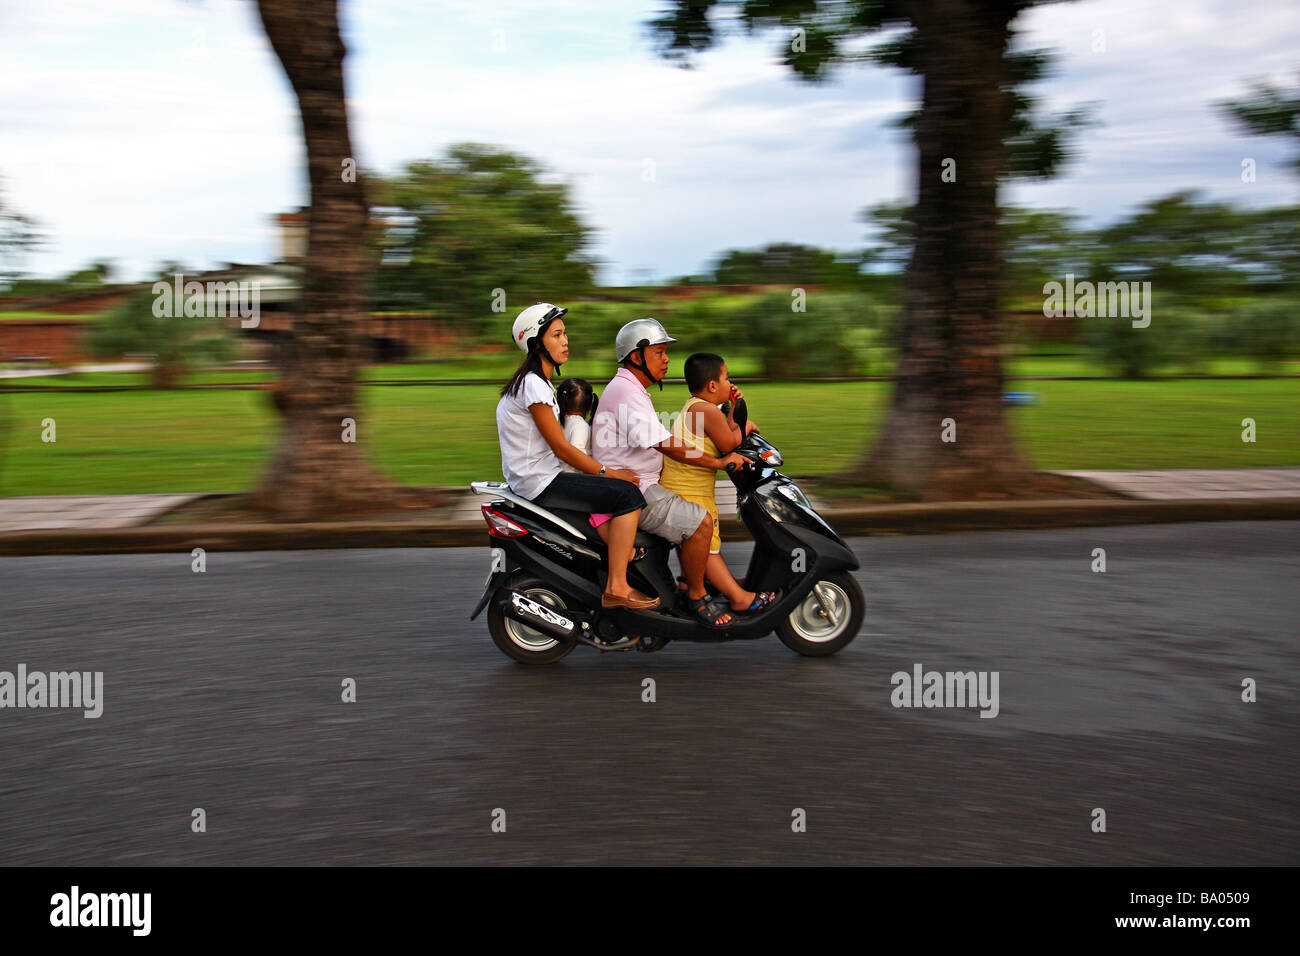 Street Scene. A family on a motor scooter. Hue Vietnam. South East Asia Stock Photo